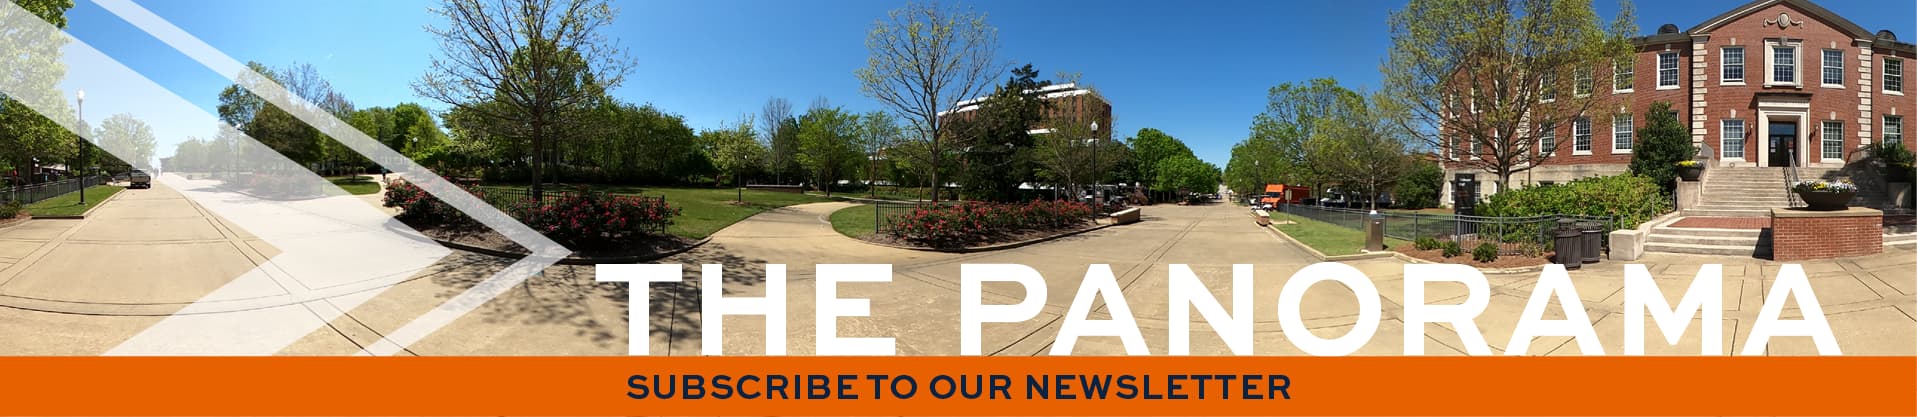 Subscribe to our newsletter The Panorama